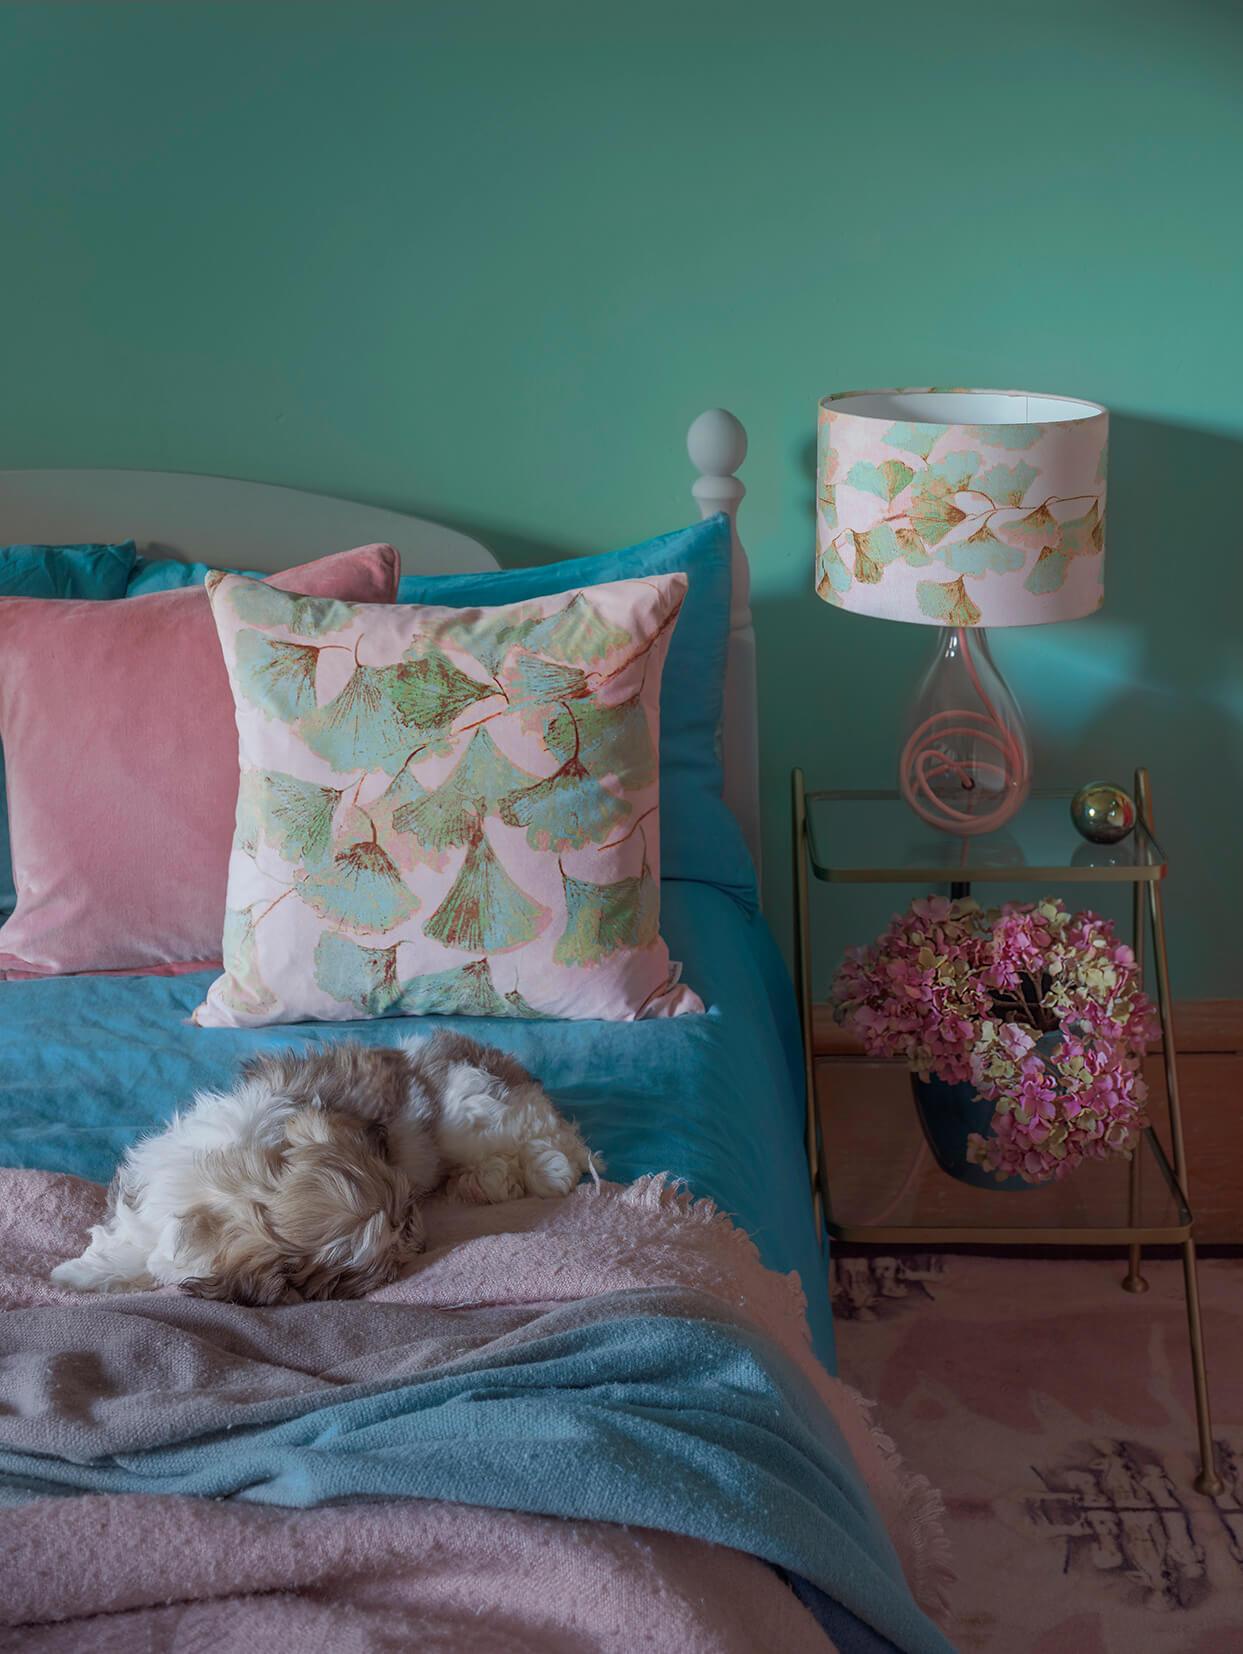 Jade and pink velvet cushion - Ginkgo in Jade glass lamp on Rose flex - designed by Anna Jacobs, in a bedroom lifestyle setting